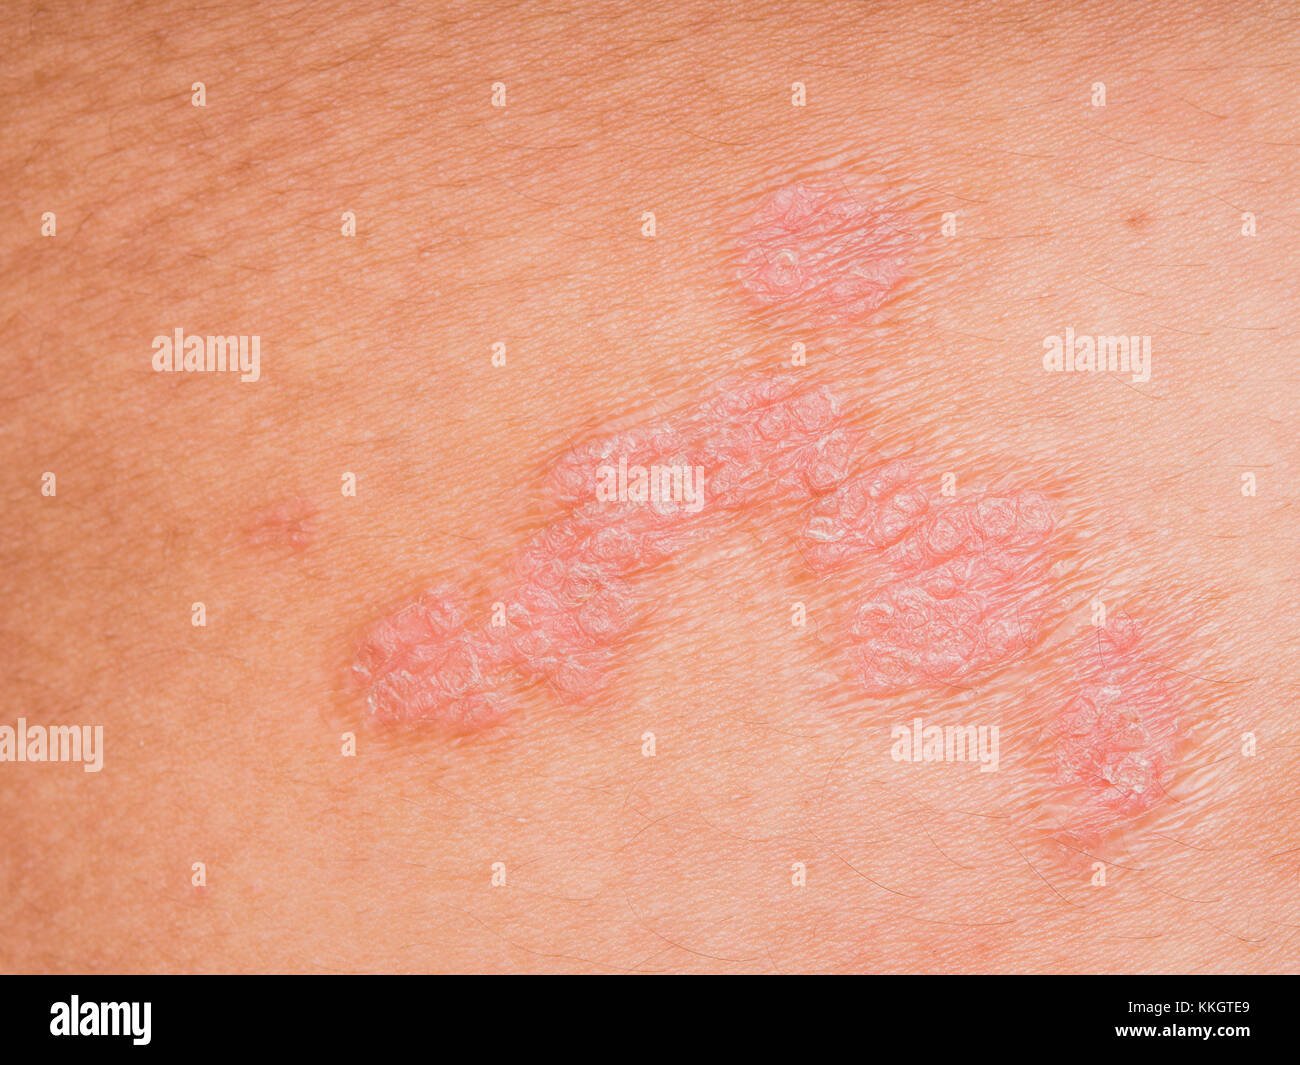 Psoriasis skin. Psoriasis is an autoimmune disease that affects the ...